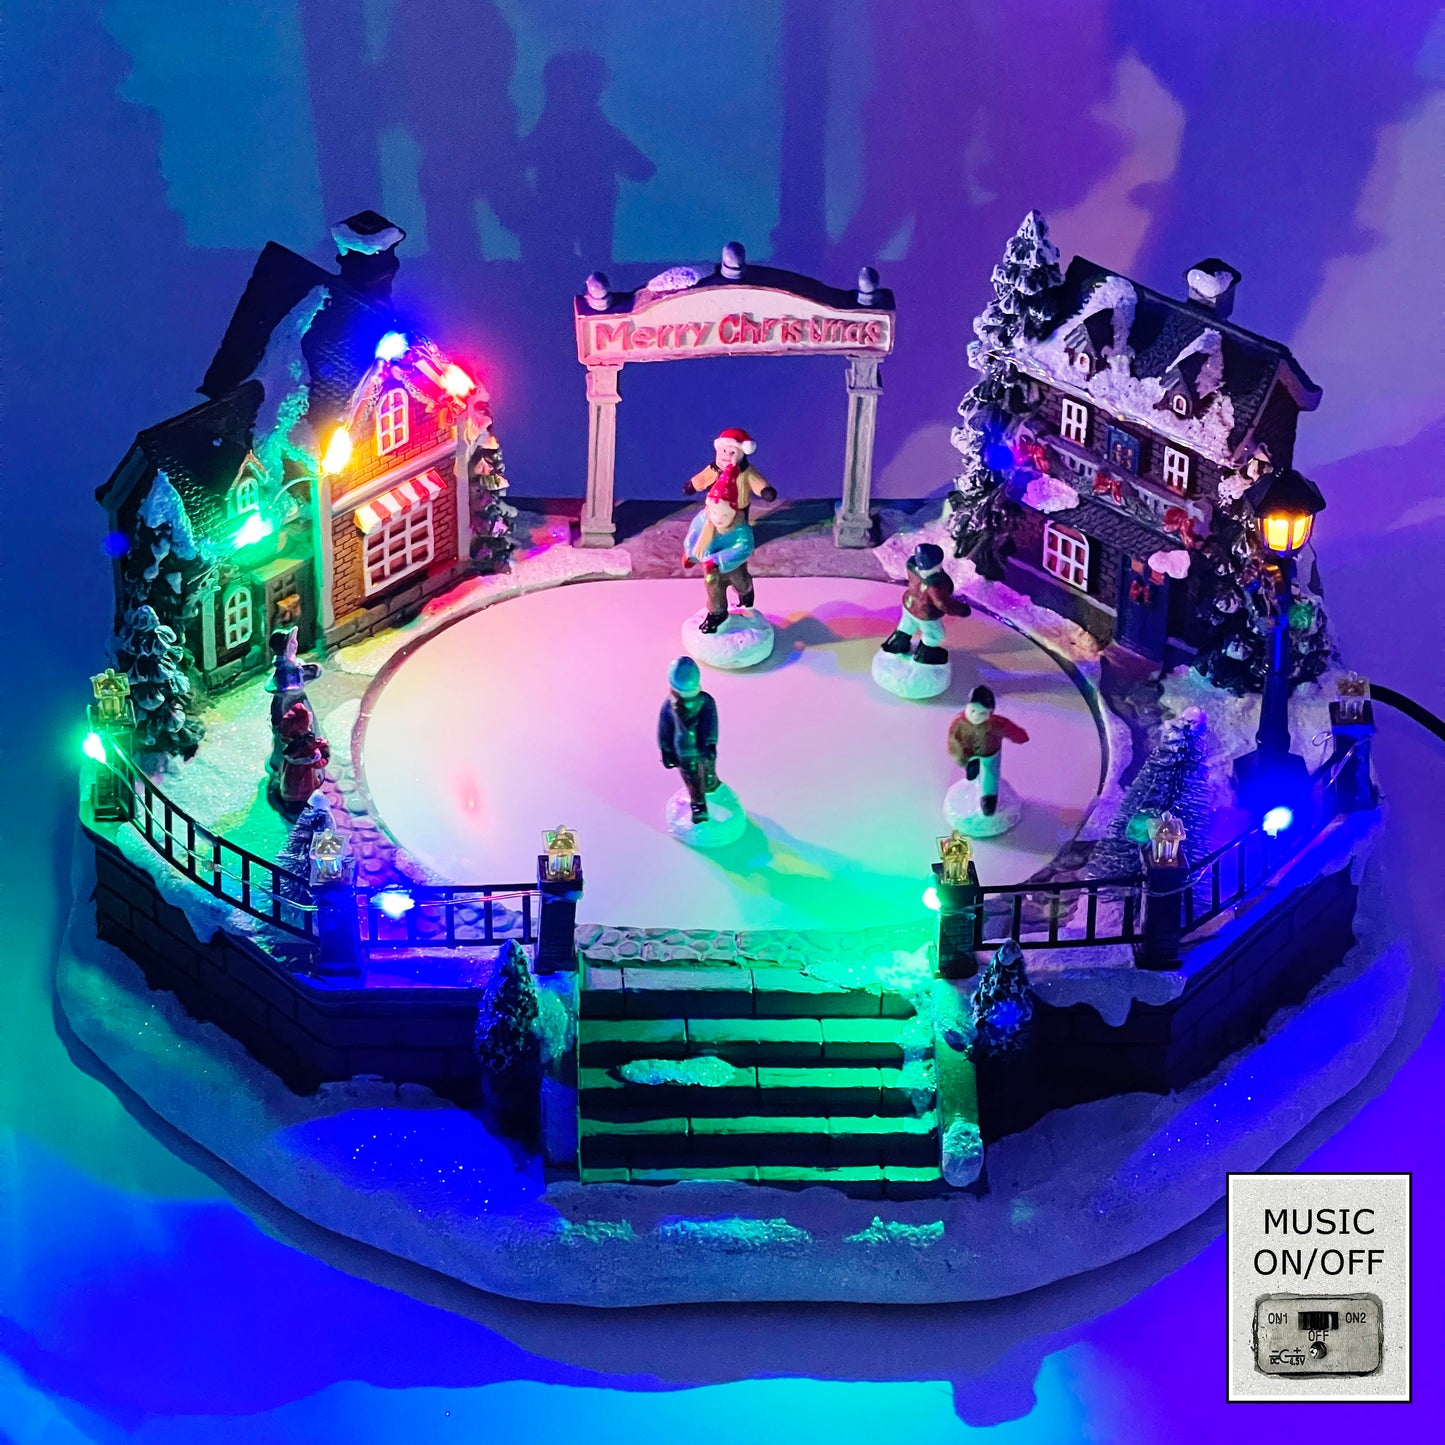 Crafted Polyresin Christmas House Collectable Figurine with USB and Battery Dual Power Source-Rink with Gliding Skaters-XH93437